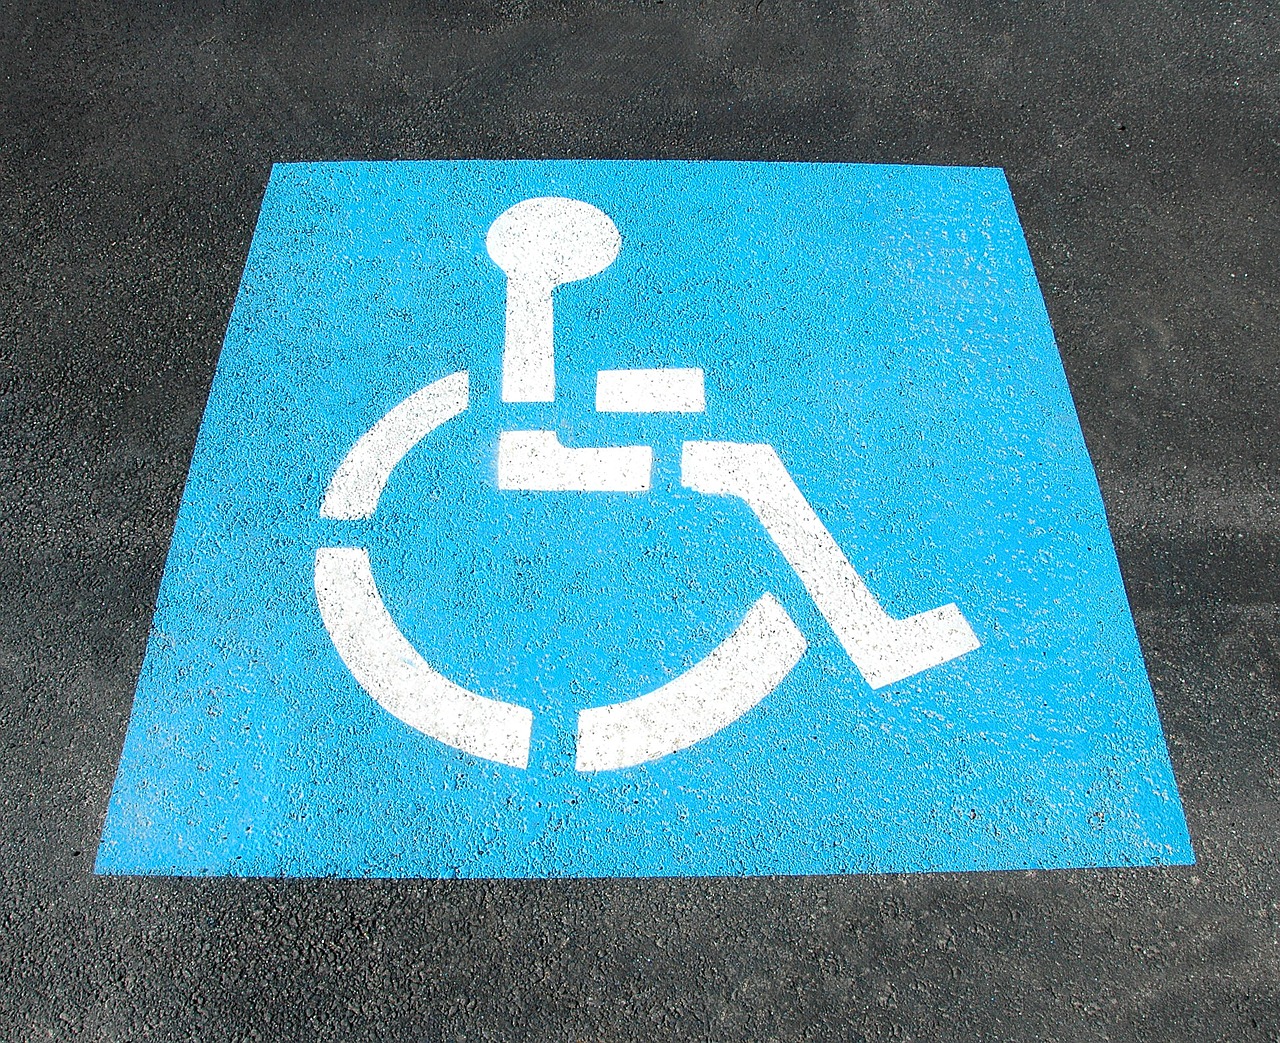 If I’m Not Disabled, Can I Camp in the Accessible Campsite?